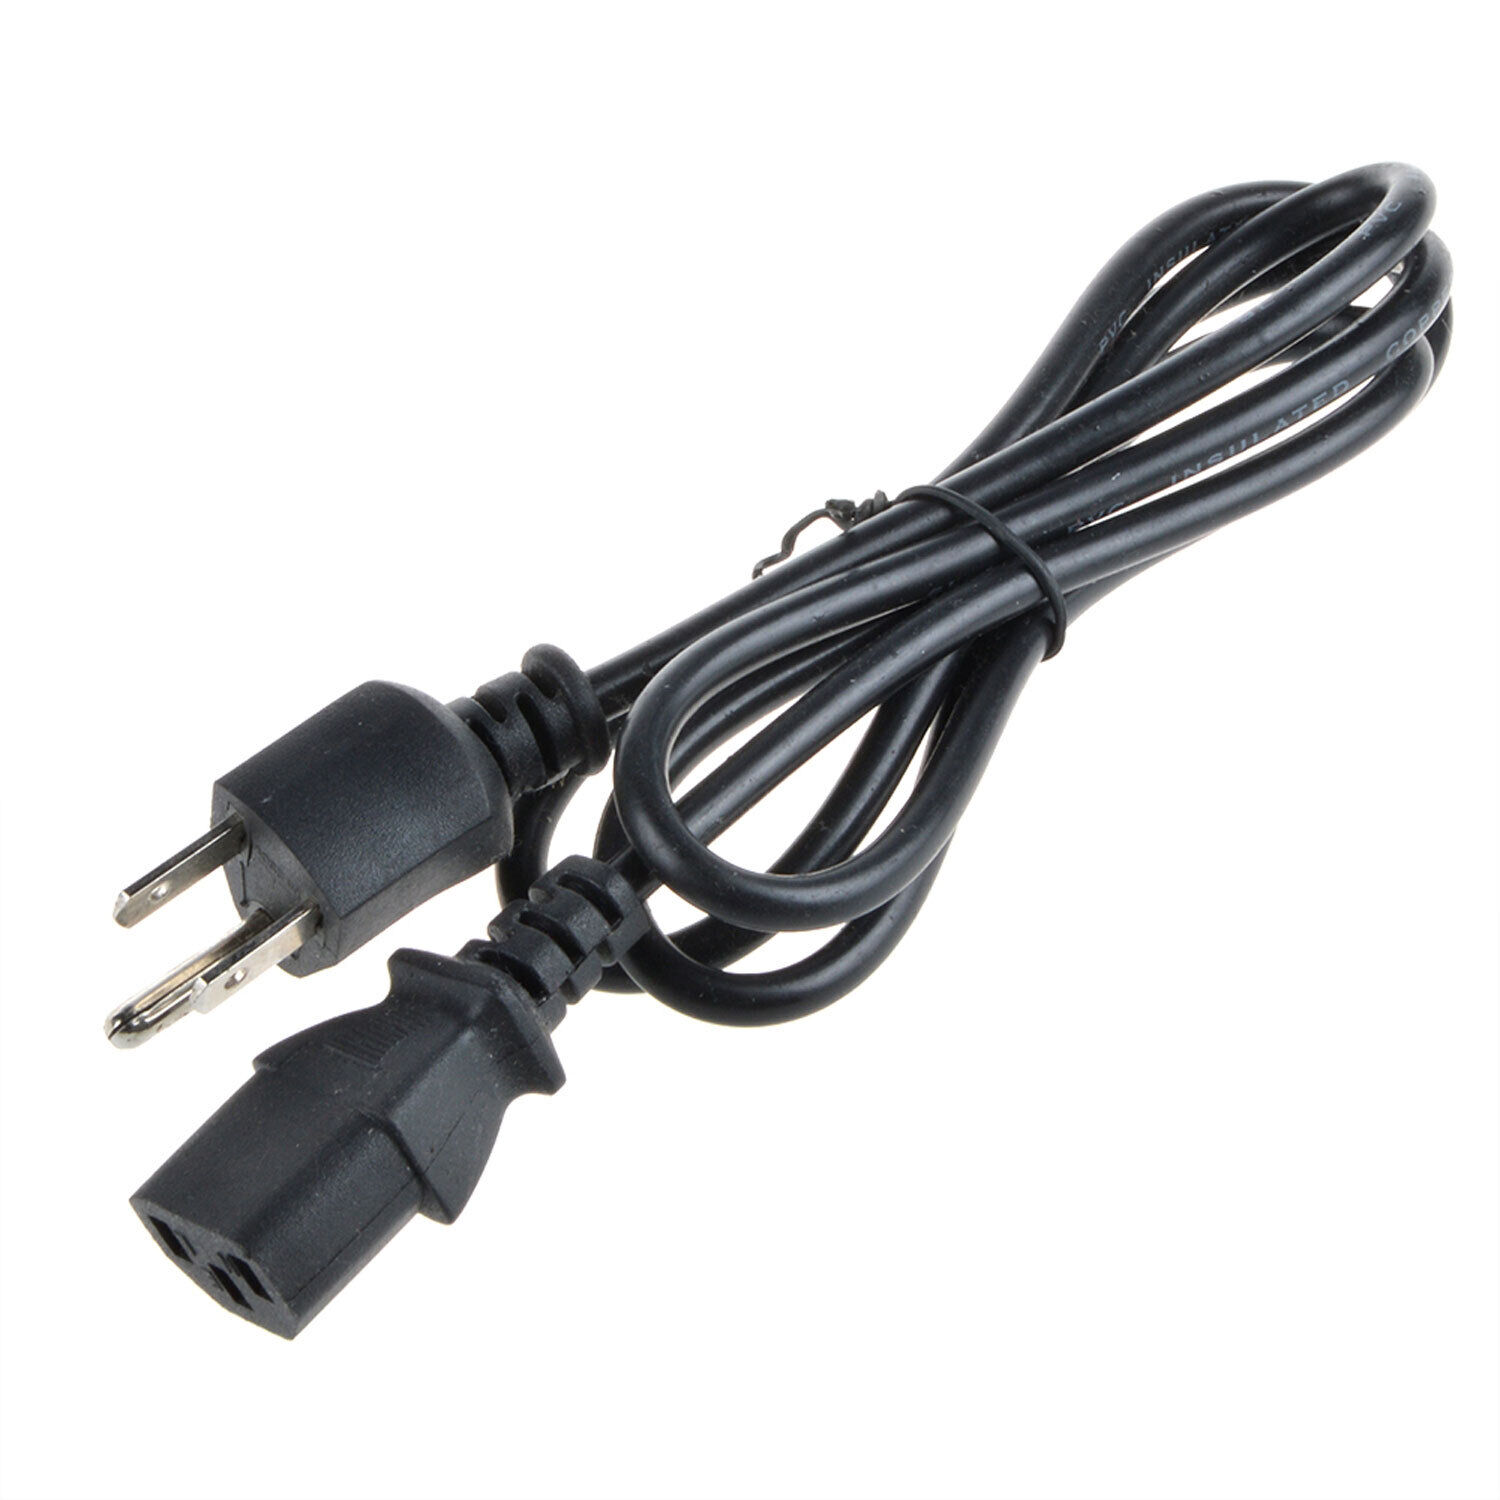 PwrON 5FT AC Power Cord Cable for HP P274 27